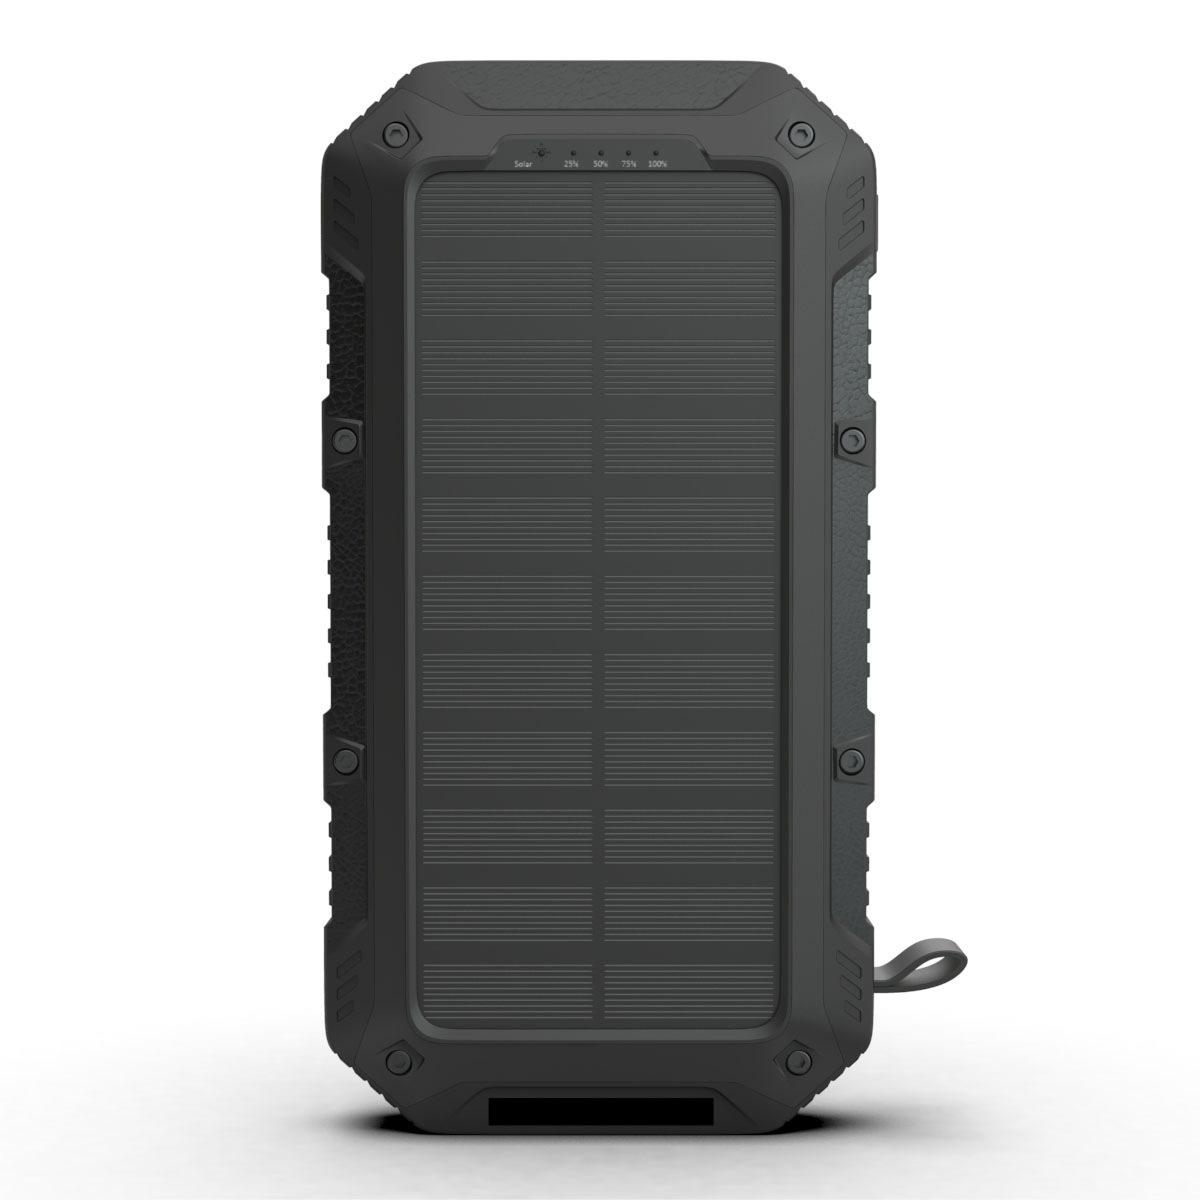 IP66 IPX6 Waterproof Solar Power Bank 20000mah Solar charger waterproof power bank portable for cell